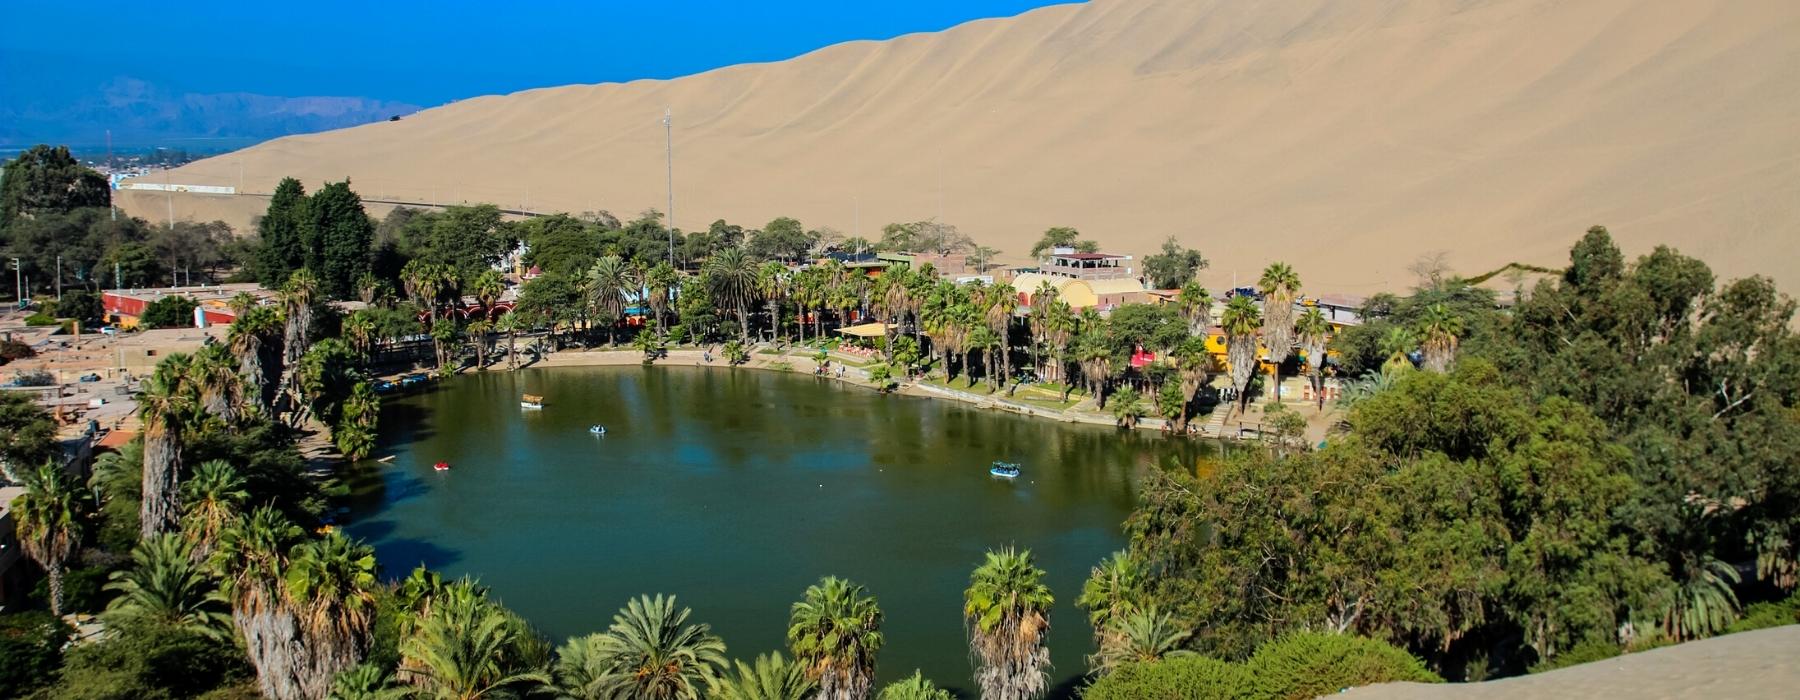 Discover the Huacachina Oasis-Natural Oasis in Peru